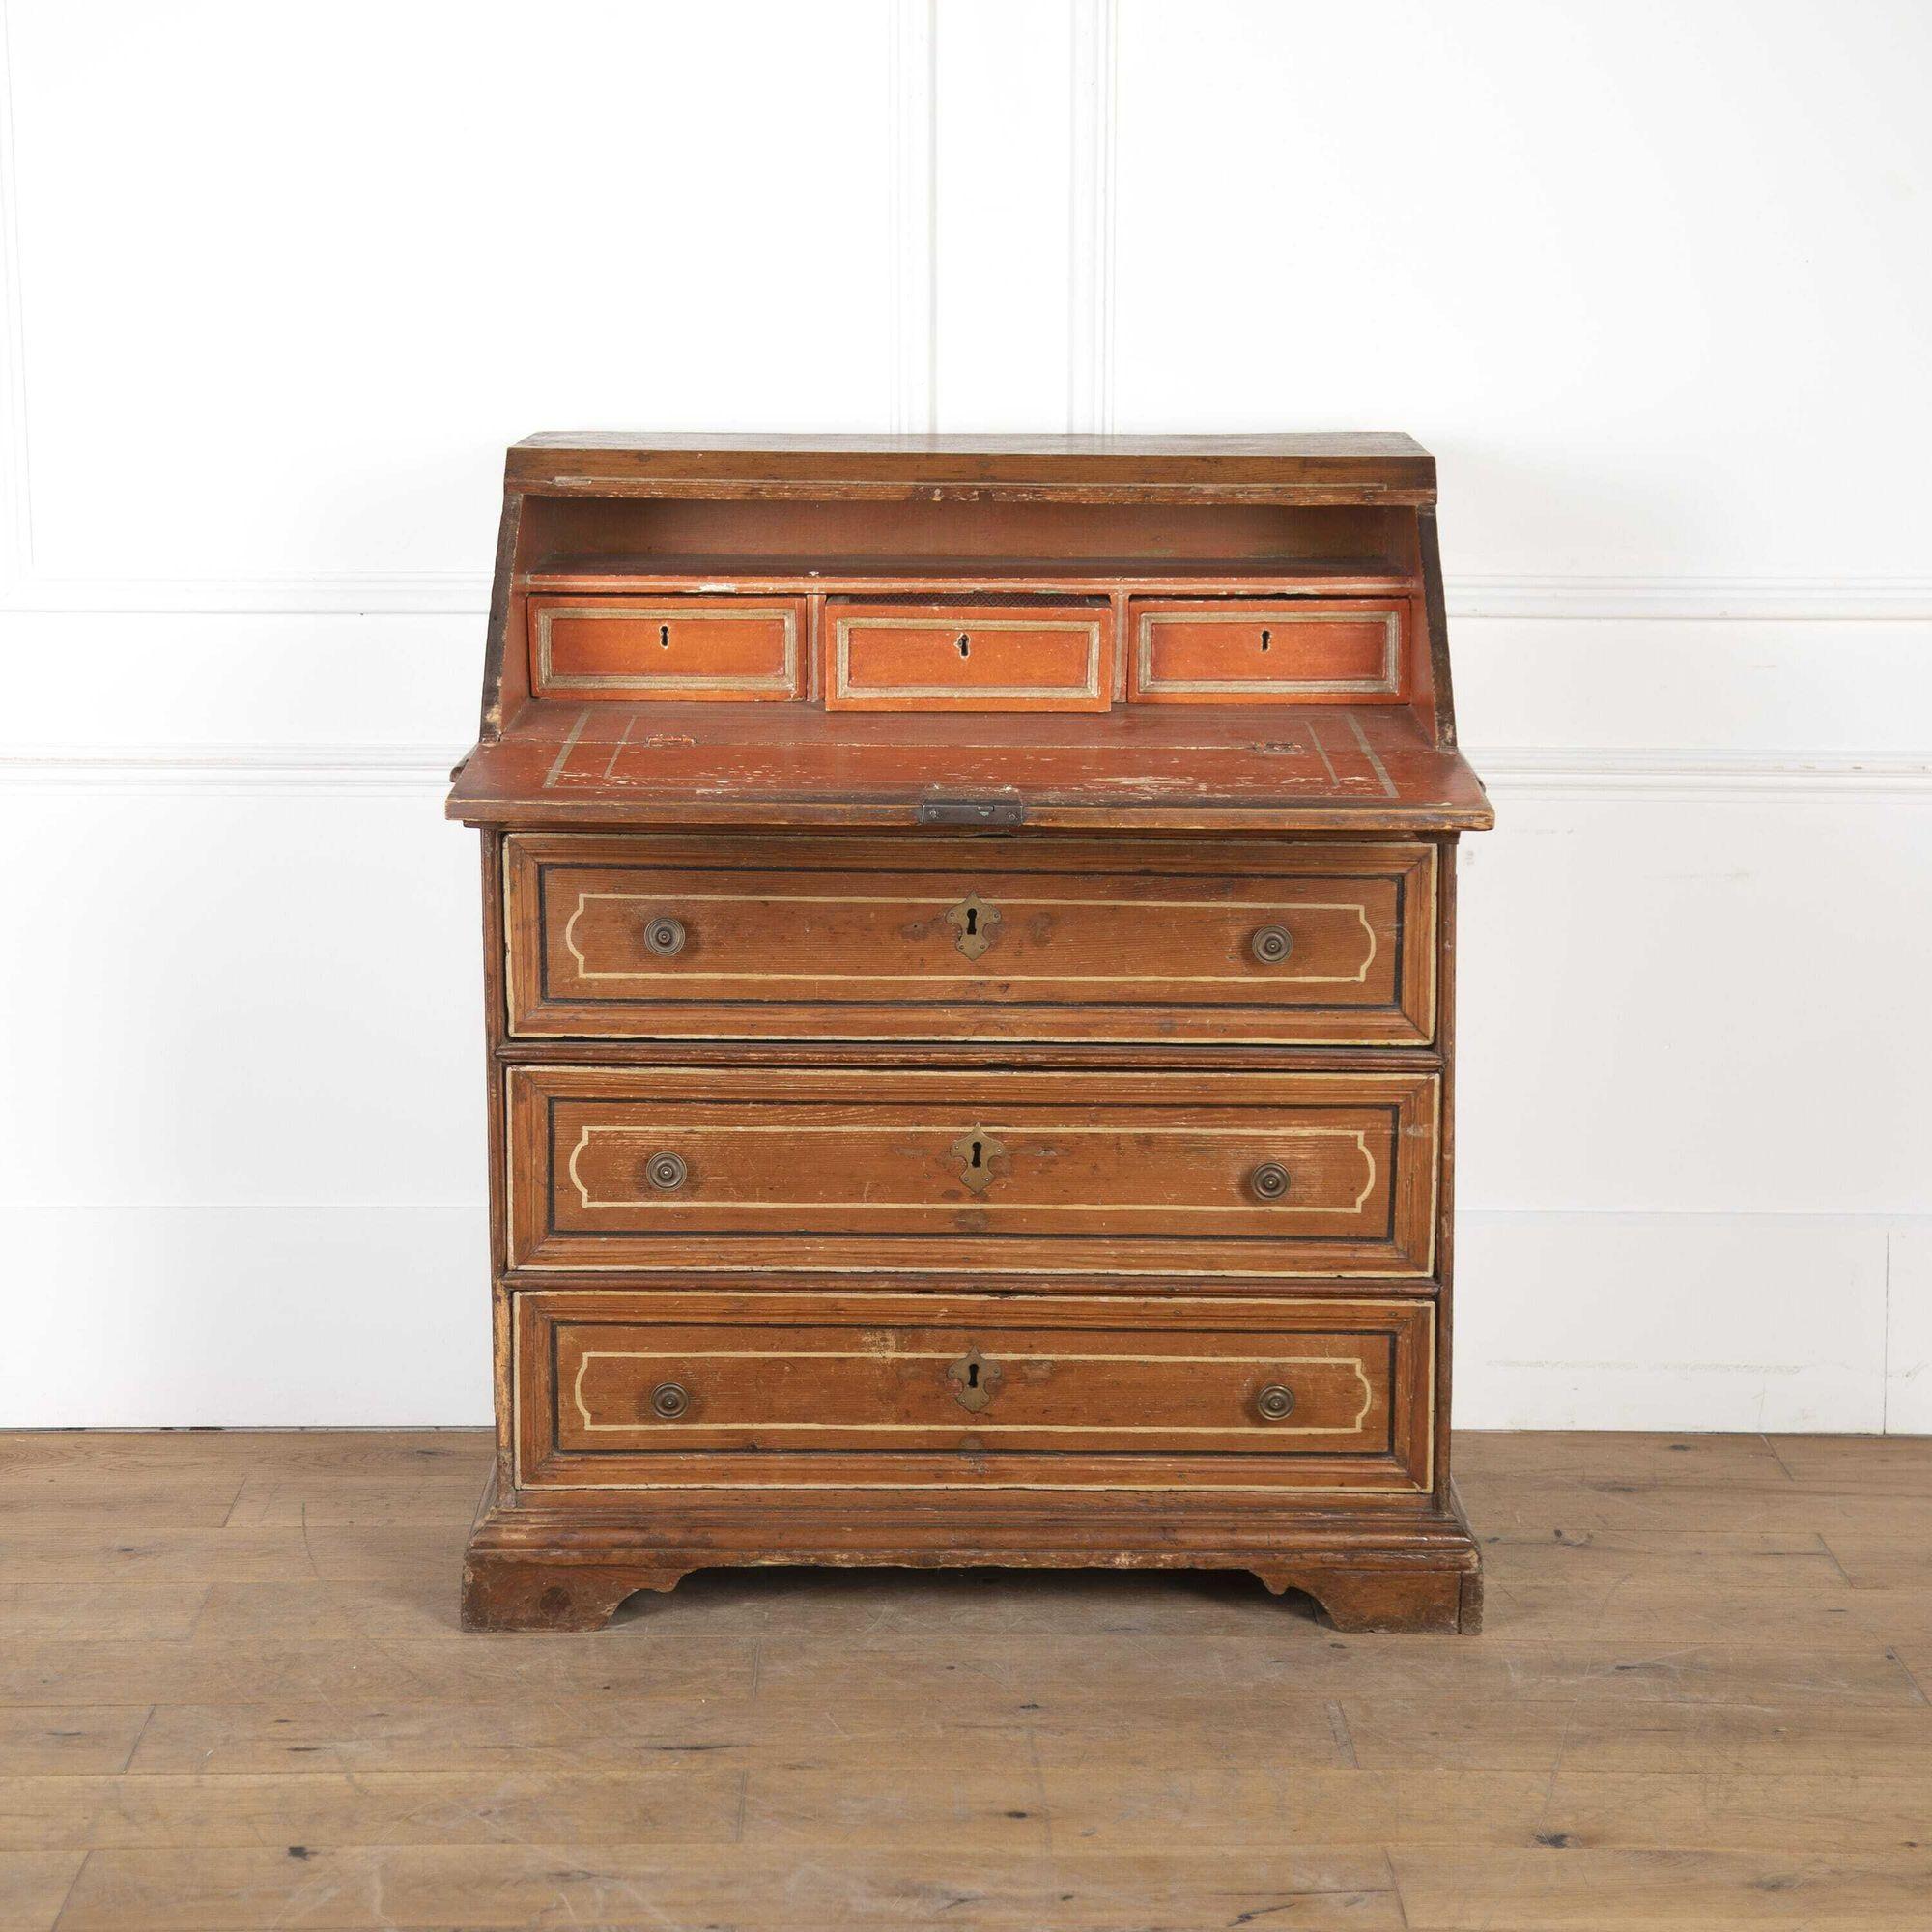 Late 18th century Tuscan bureau.
Dating from the late 18th Century, this Italian painted bureau originates from Tuscany.
The slope top is line inlaid with an inner line inlaid panel having shaped ends, the three long paper lined drawers below with